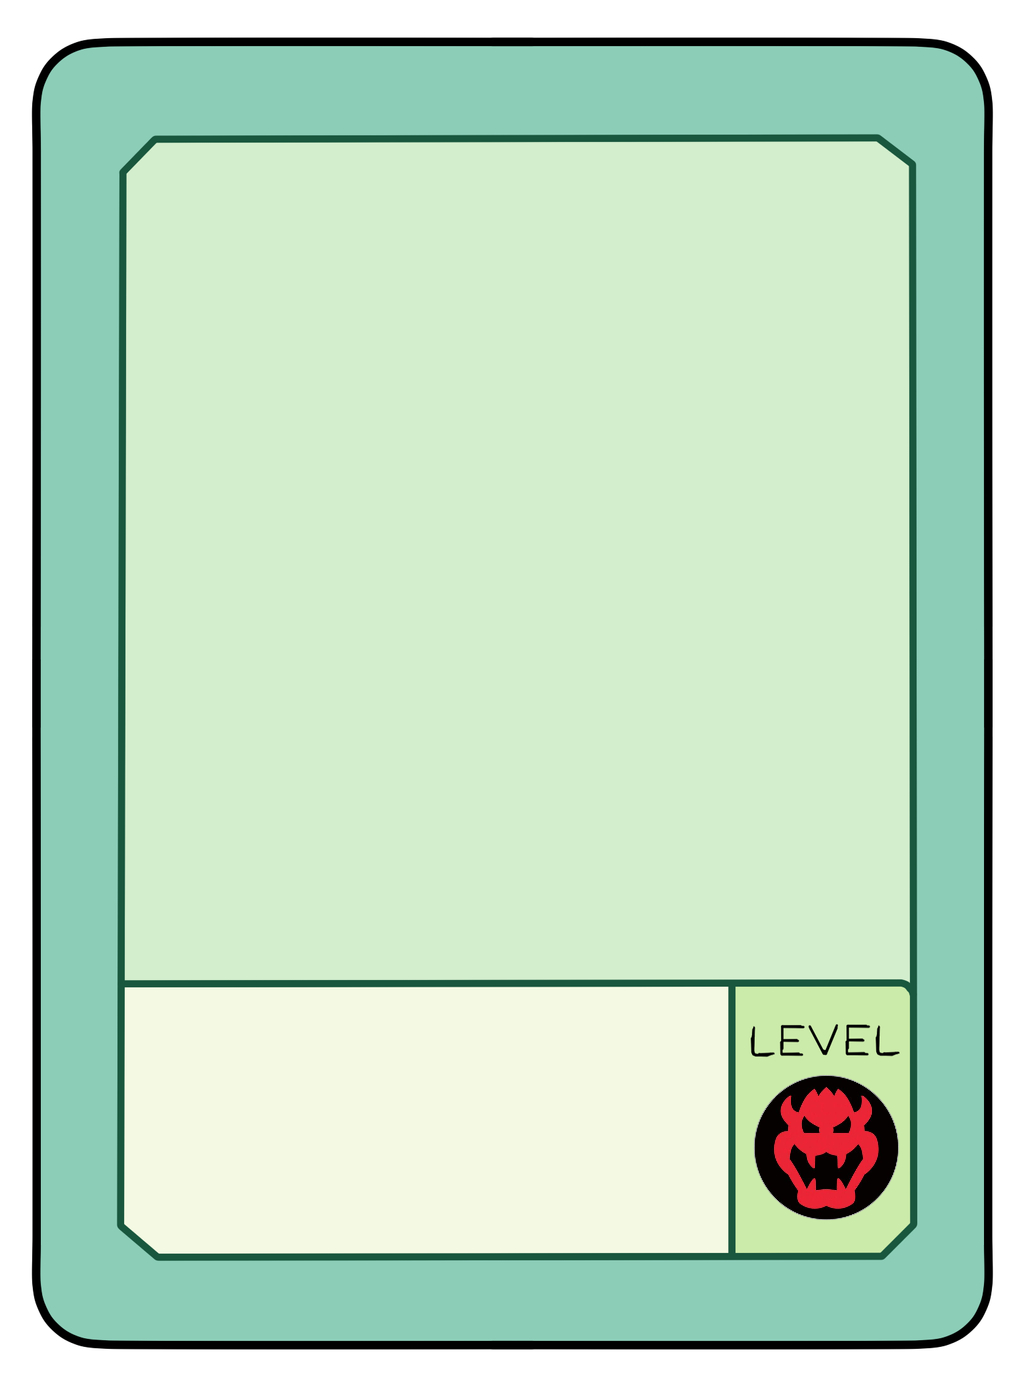 High Quality OC Pow Card Level bowser's minions character Blank Meme Template